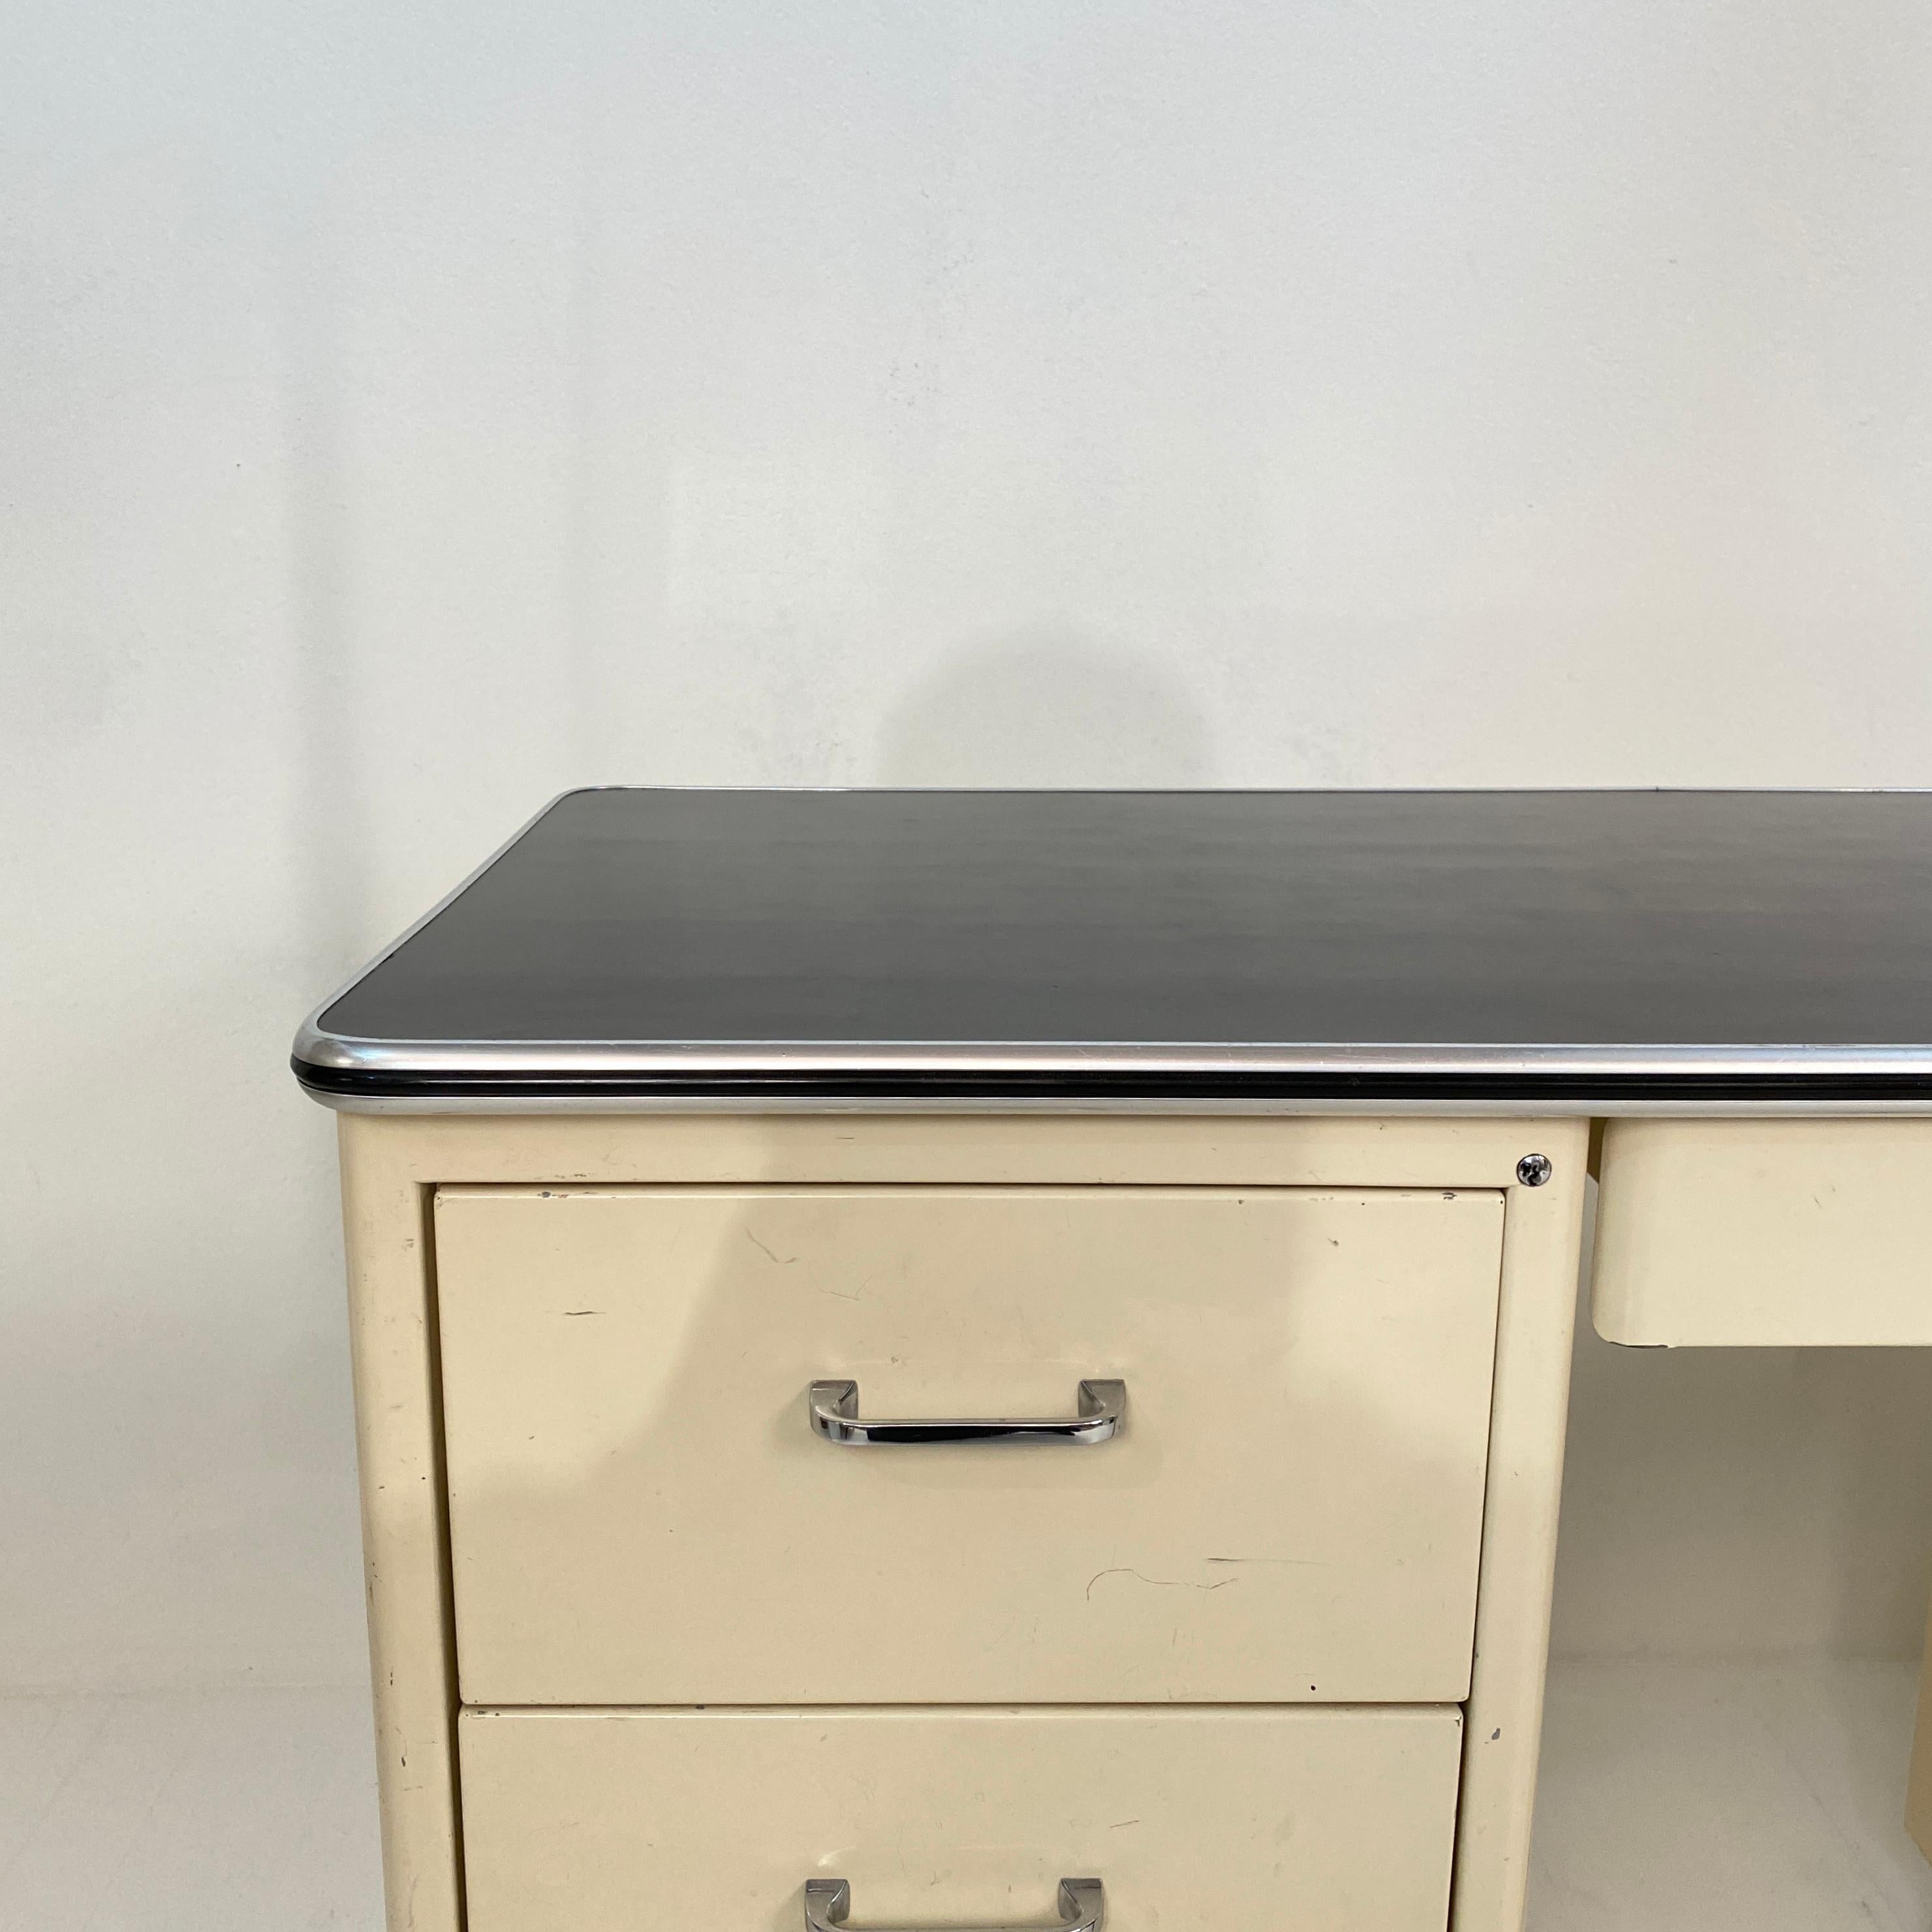 1930s German Bauhaus Desk Out of White Lacquered Metal and a Black Linoleum Top 3